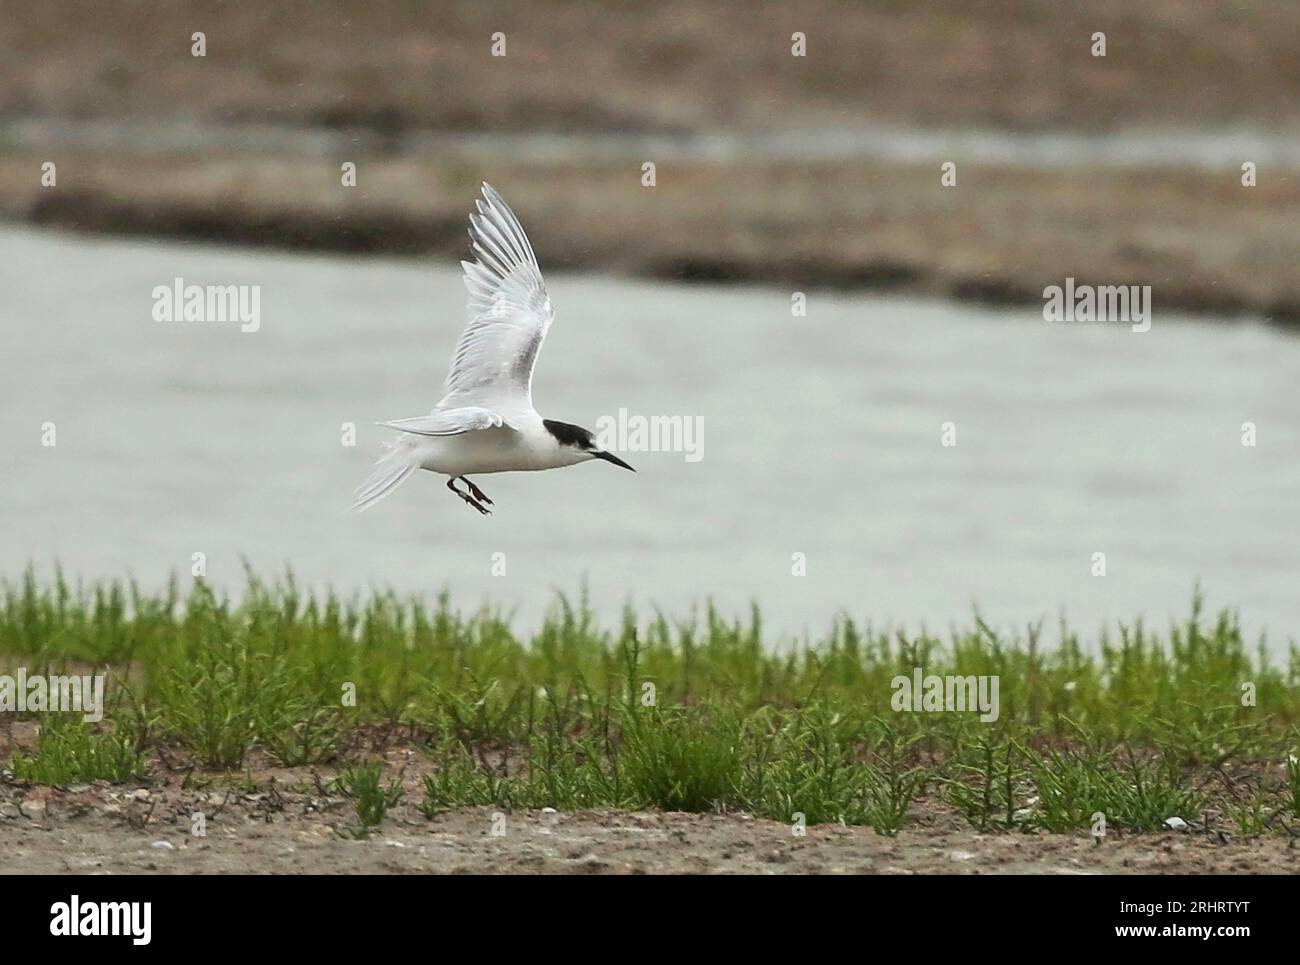 roseate tern (Sterna dougallii), Second calendar year Roseate Tern in rarely photographed and seen plumage, Netherlands, Camperduin Stock Photo